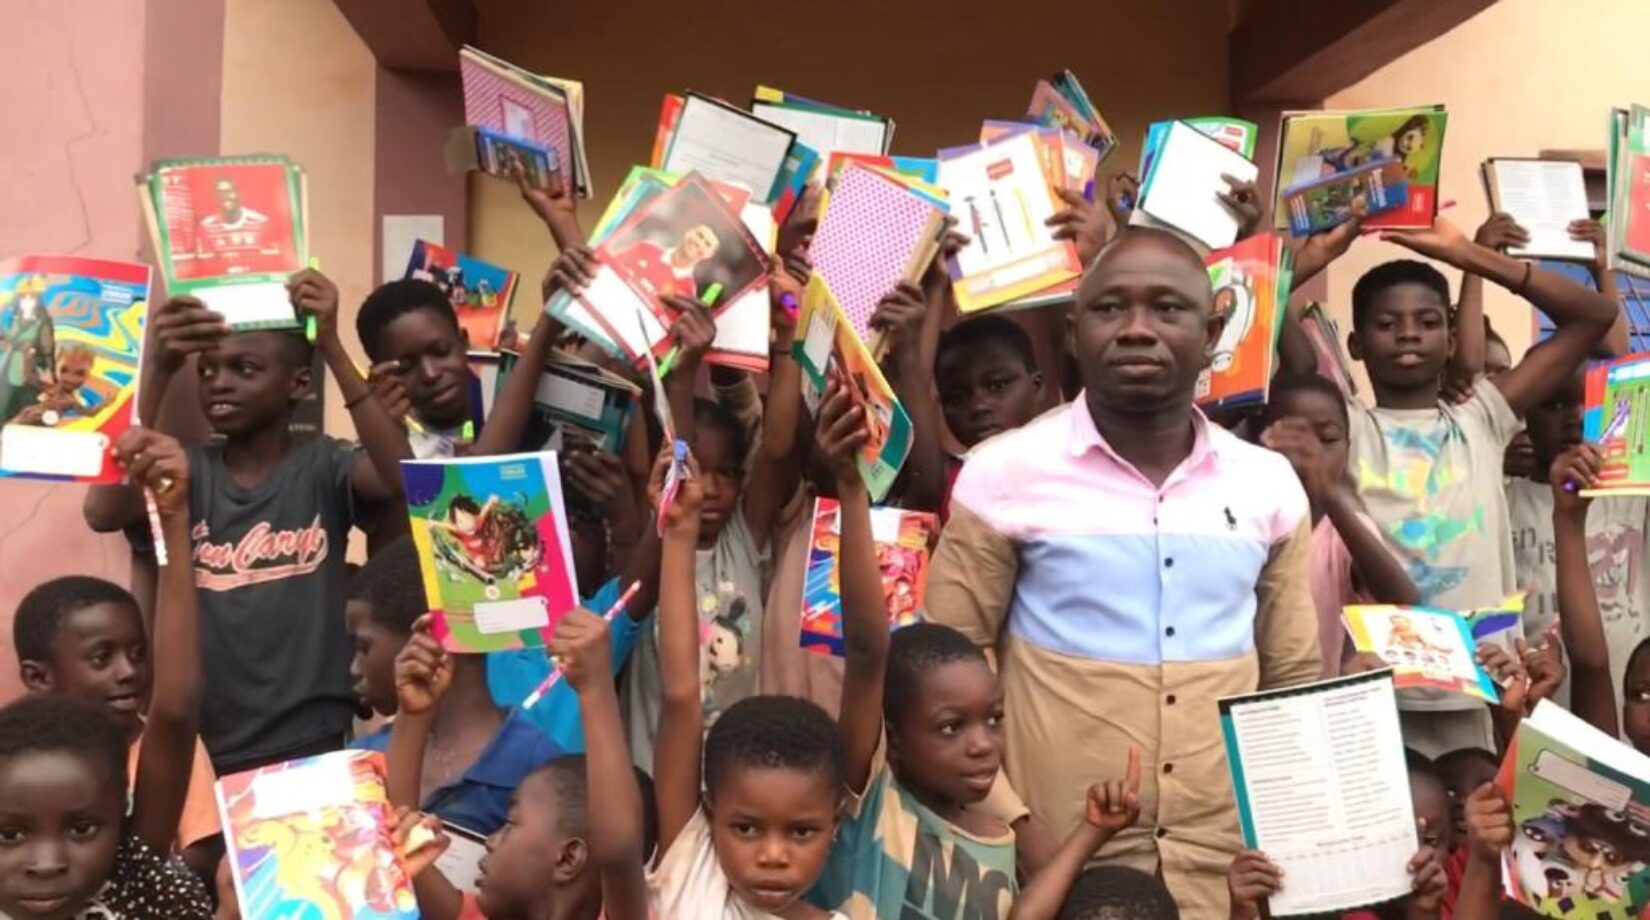 Otec FM’s Journalist Supports Pupils With Educational Materials